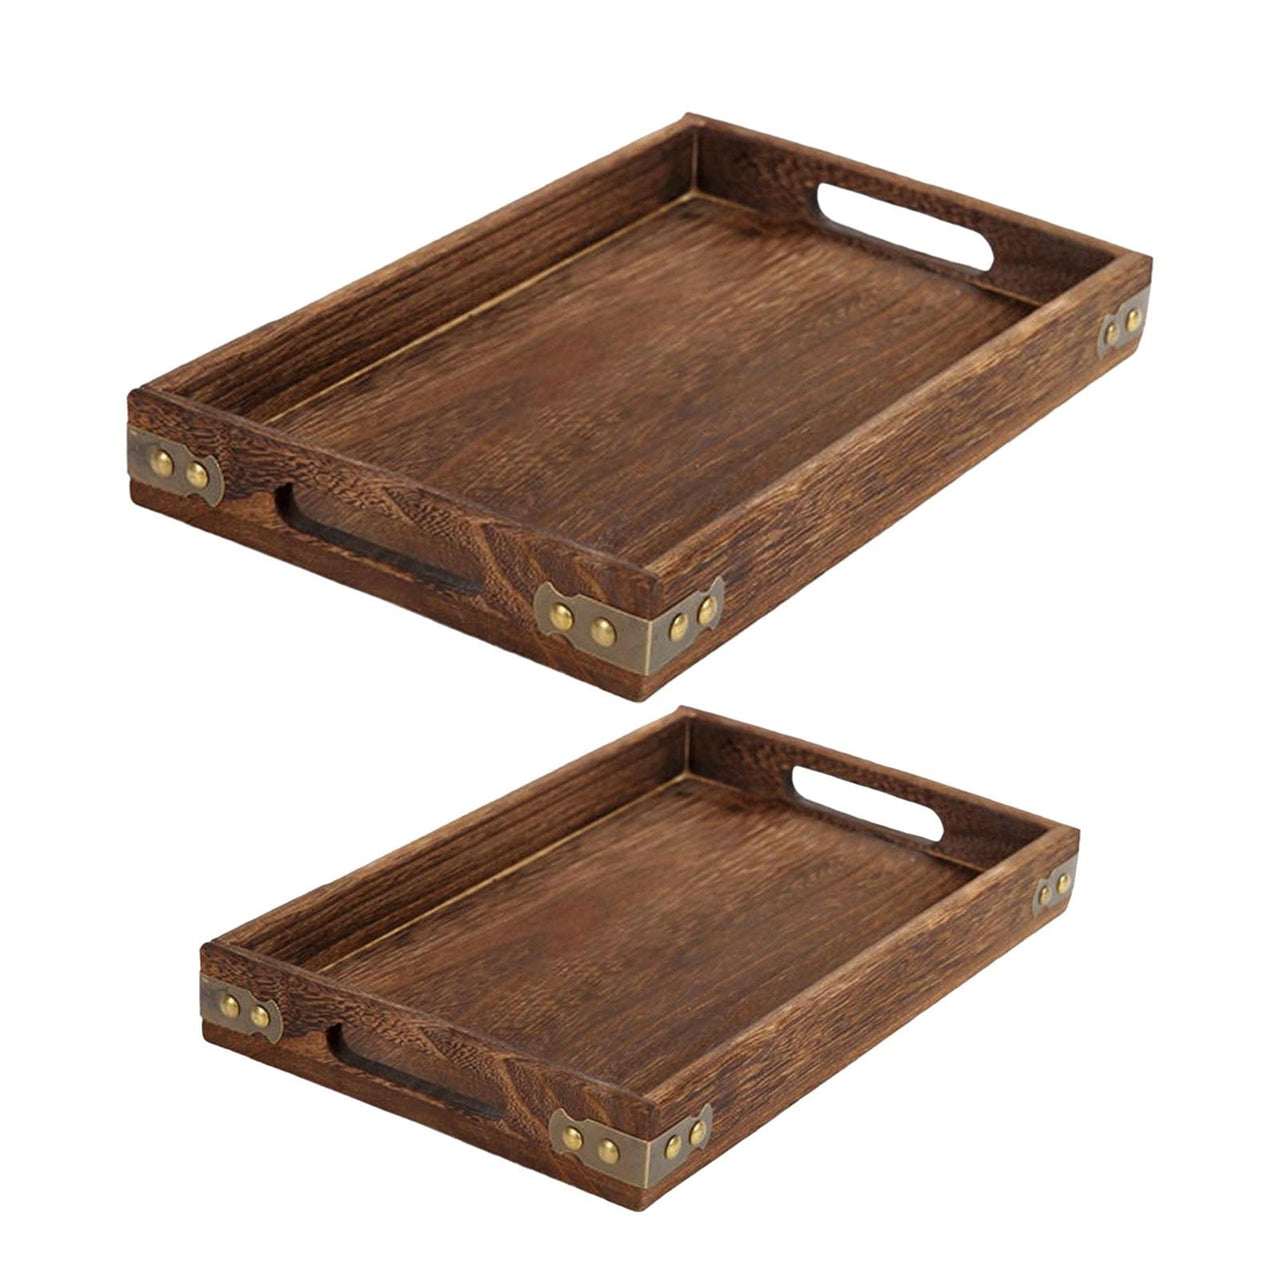 Rustic Rectangular Wooden Serving Tray with Handle